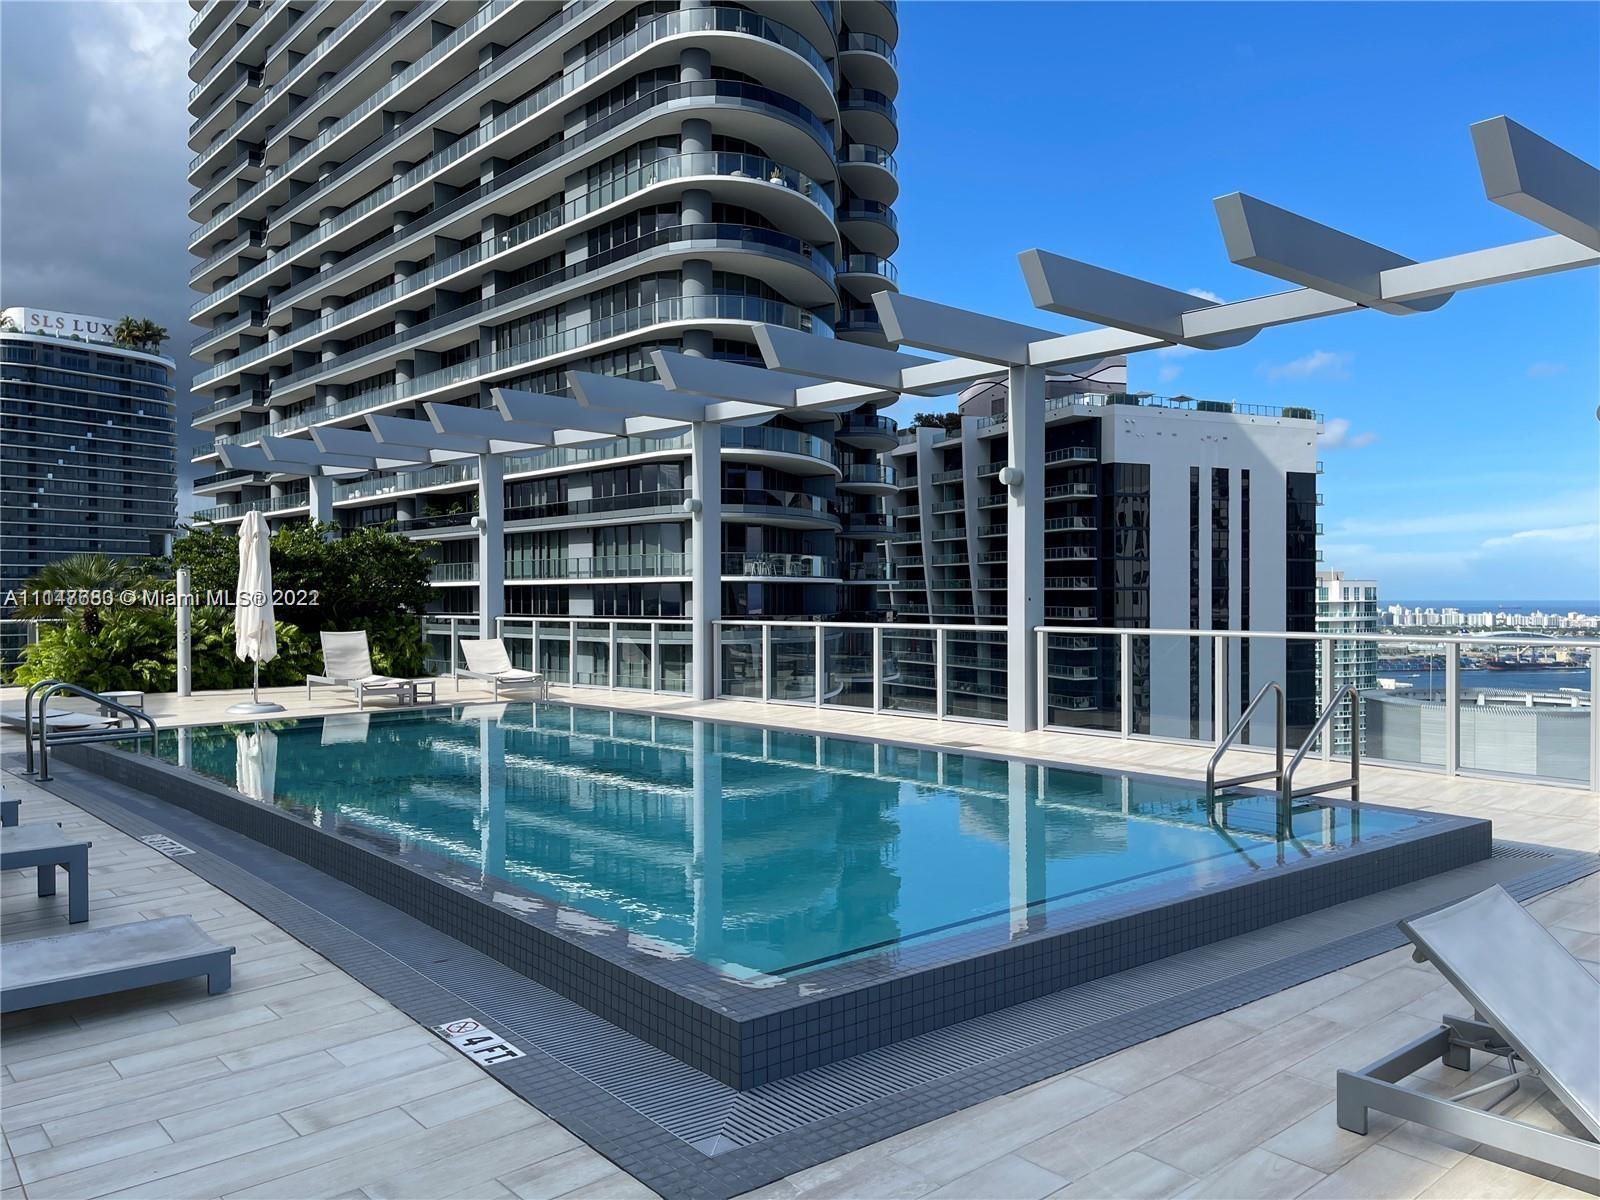 BRICKELL STUDIO AT MILLECENTO BUILDING WITH AMAZING VIEWS FROM THE 40TH FLOOR. WALK TO MARY BRICKELL VILLAGE, RESTAURANTS, BARS AND SHOPS BEAUTIFUL KITCHEN. AMAZING AMENITIES POOL, FITNESS CENTER, MOVIE THEATER, LIBRARY, POOL TABLE, VALET, 24/7 SECURITY. WASHER AND DRYER INSIDE THE UNIT. BEST LOCATION